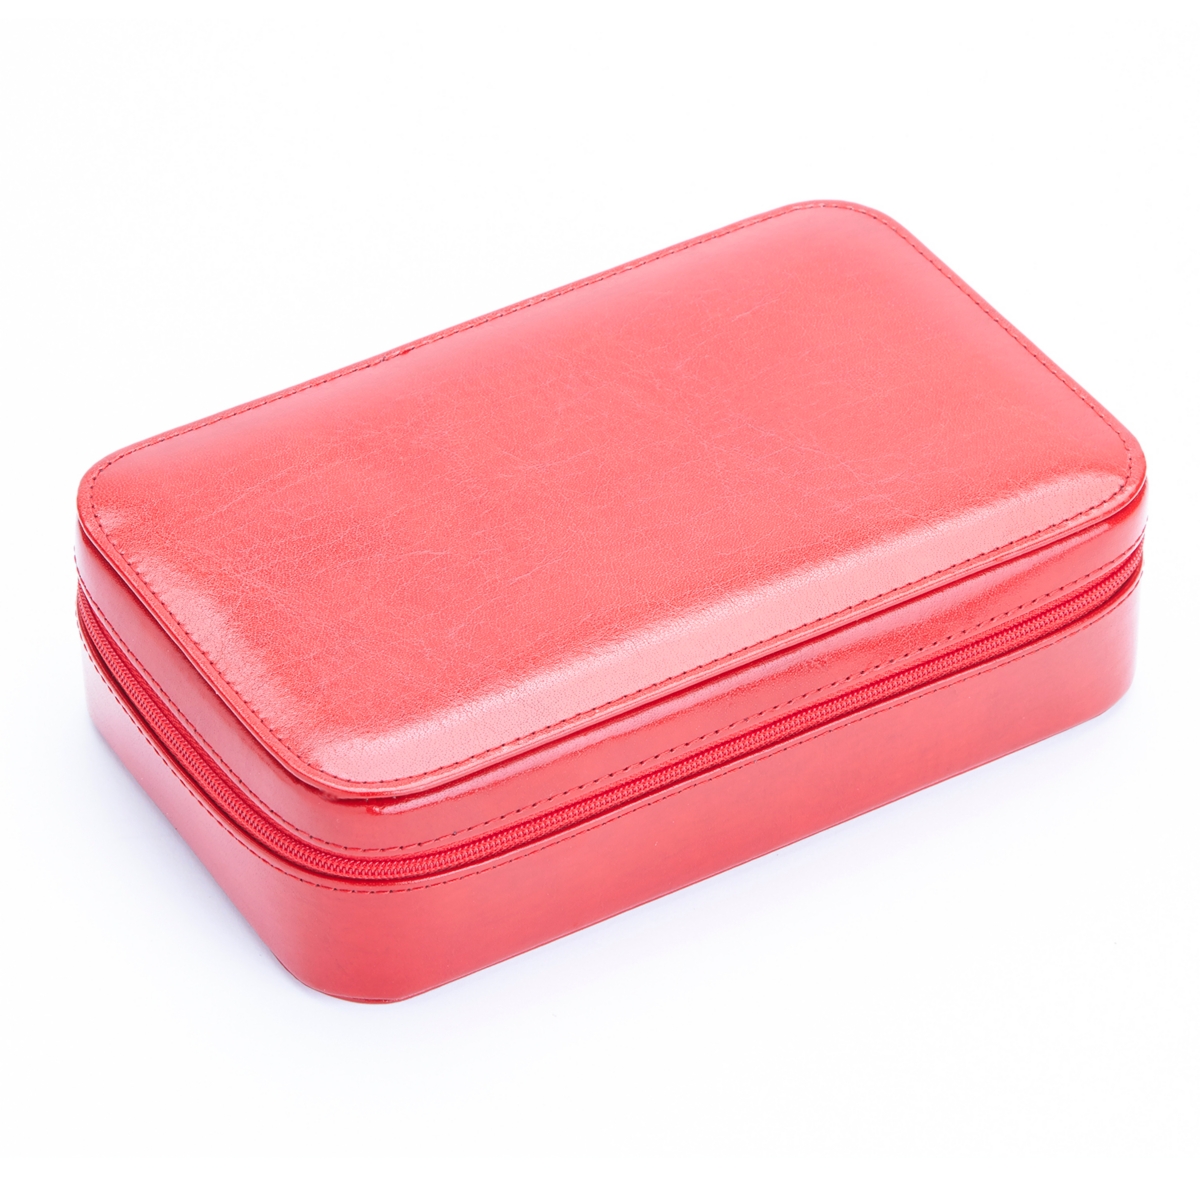 Zippered Travel Jewelry Case - Red